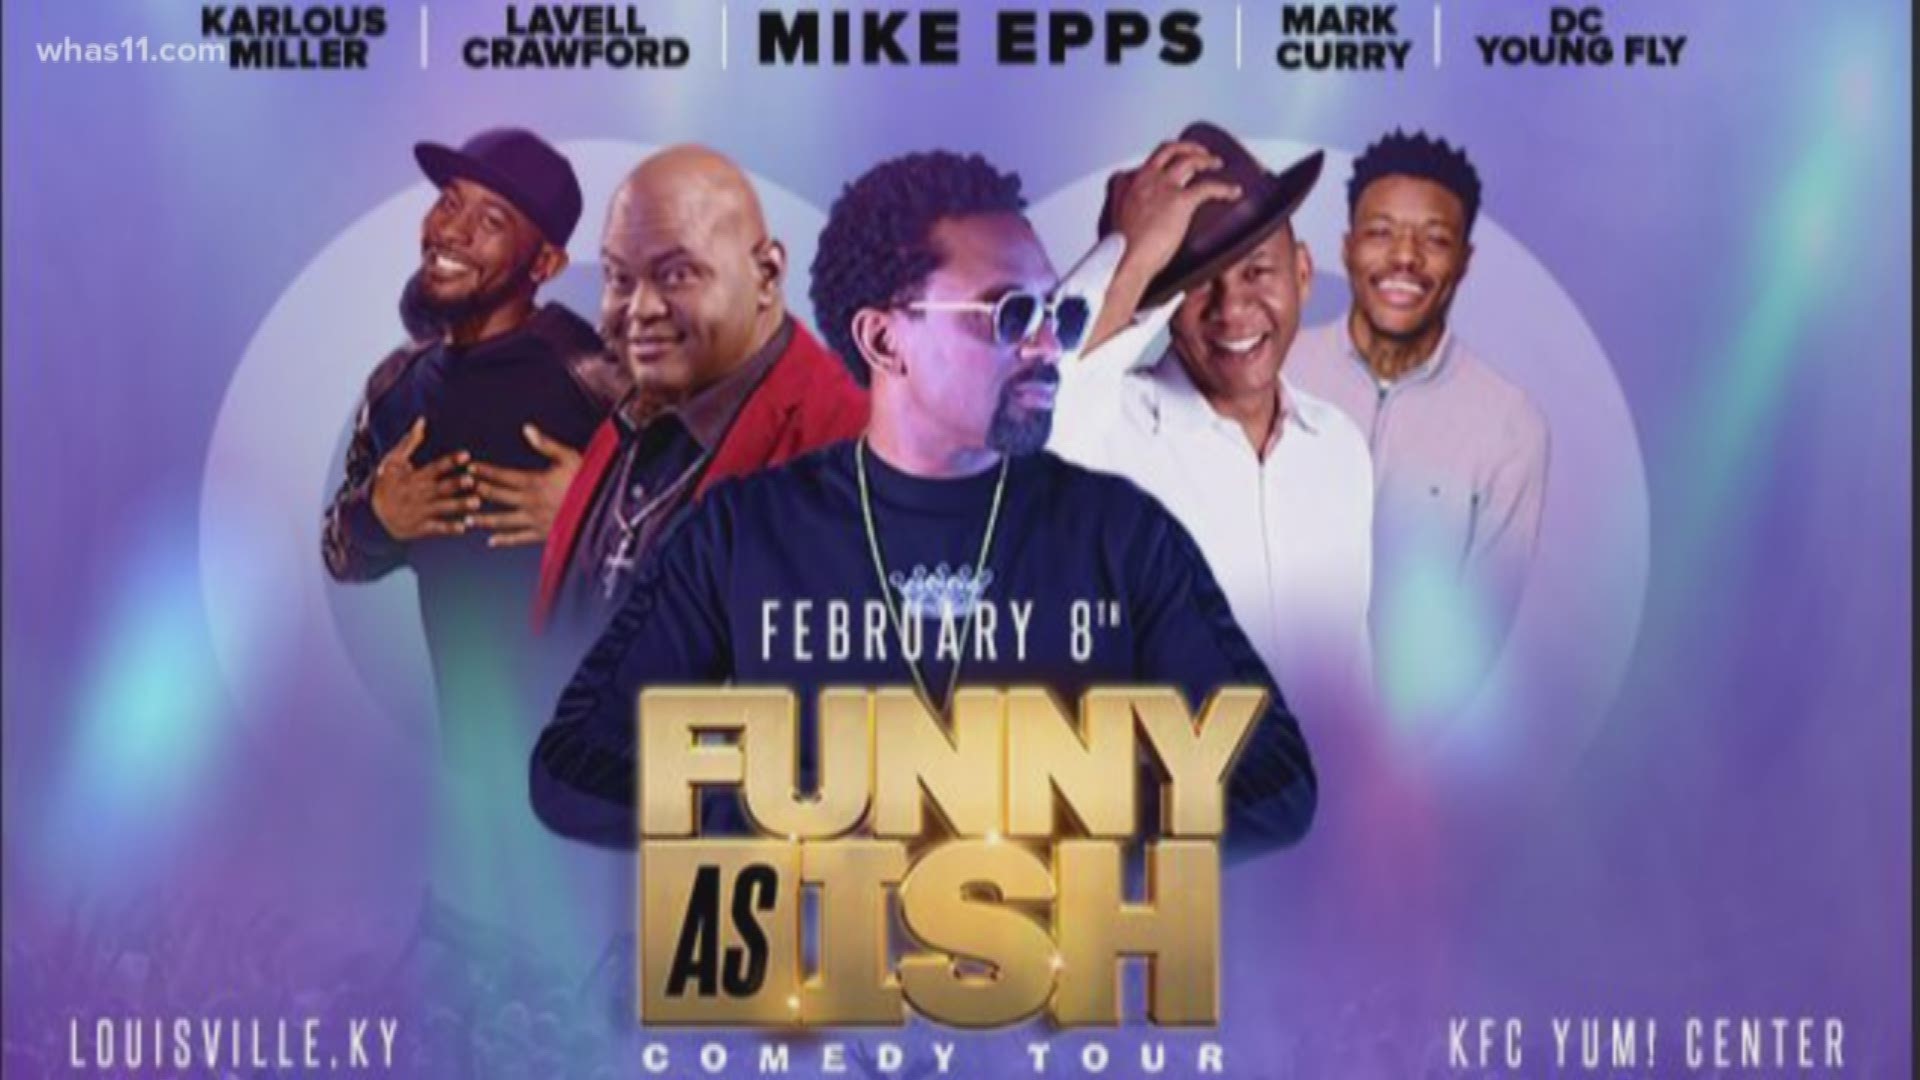 Mike Epps "Funny As Ish" comedy tour makes a stop in Louisville. The411's Sherlene Shanklin has more events that are happening around town.